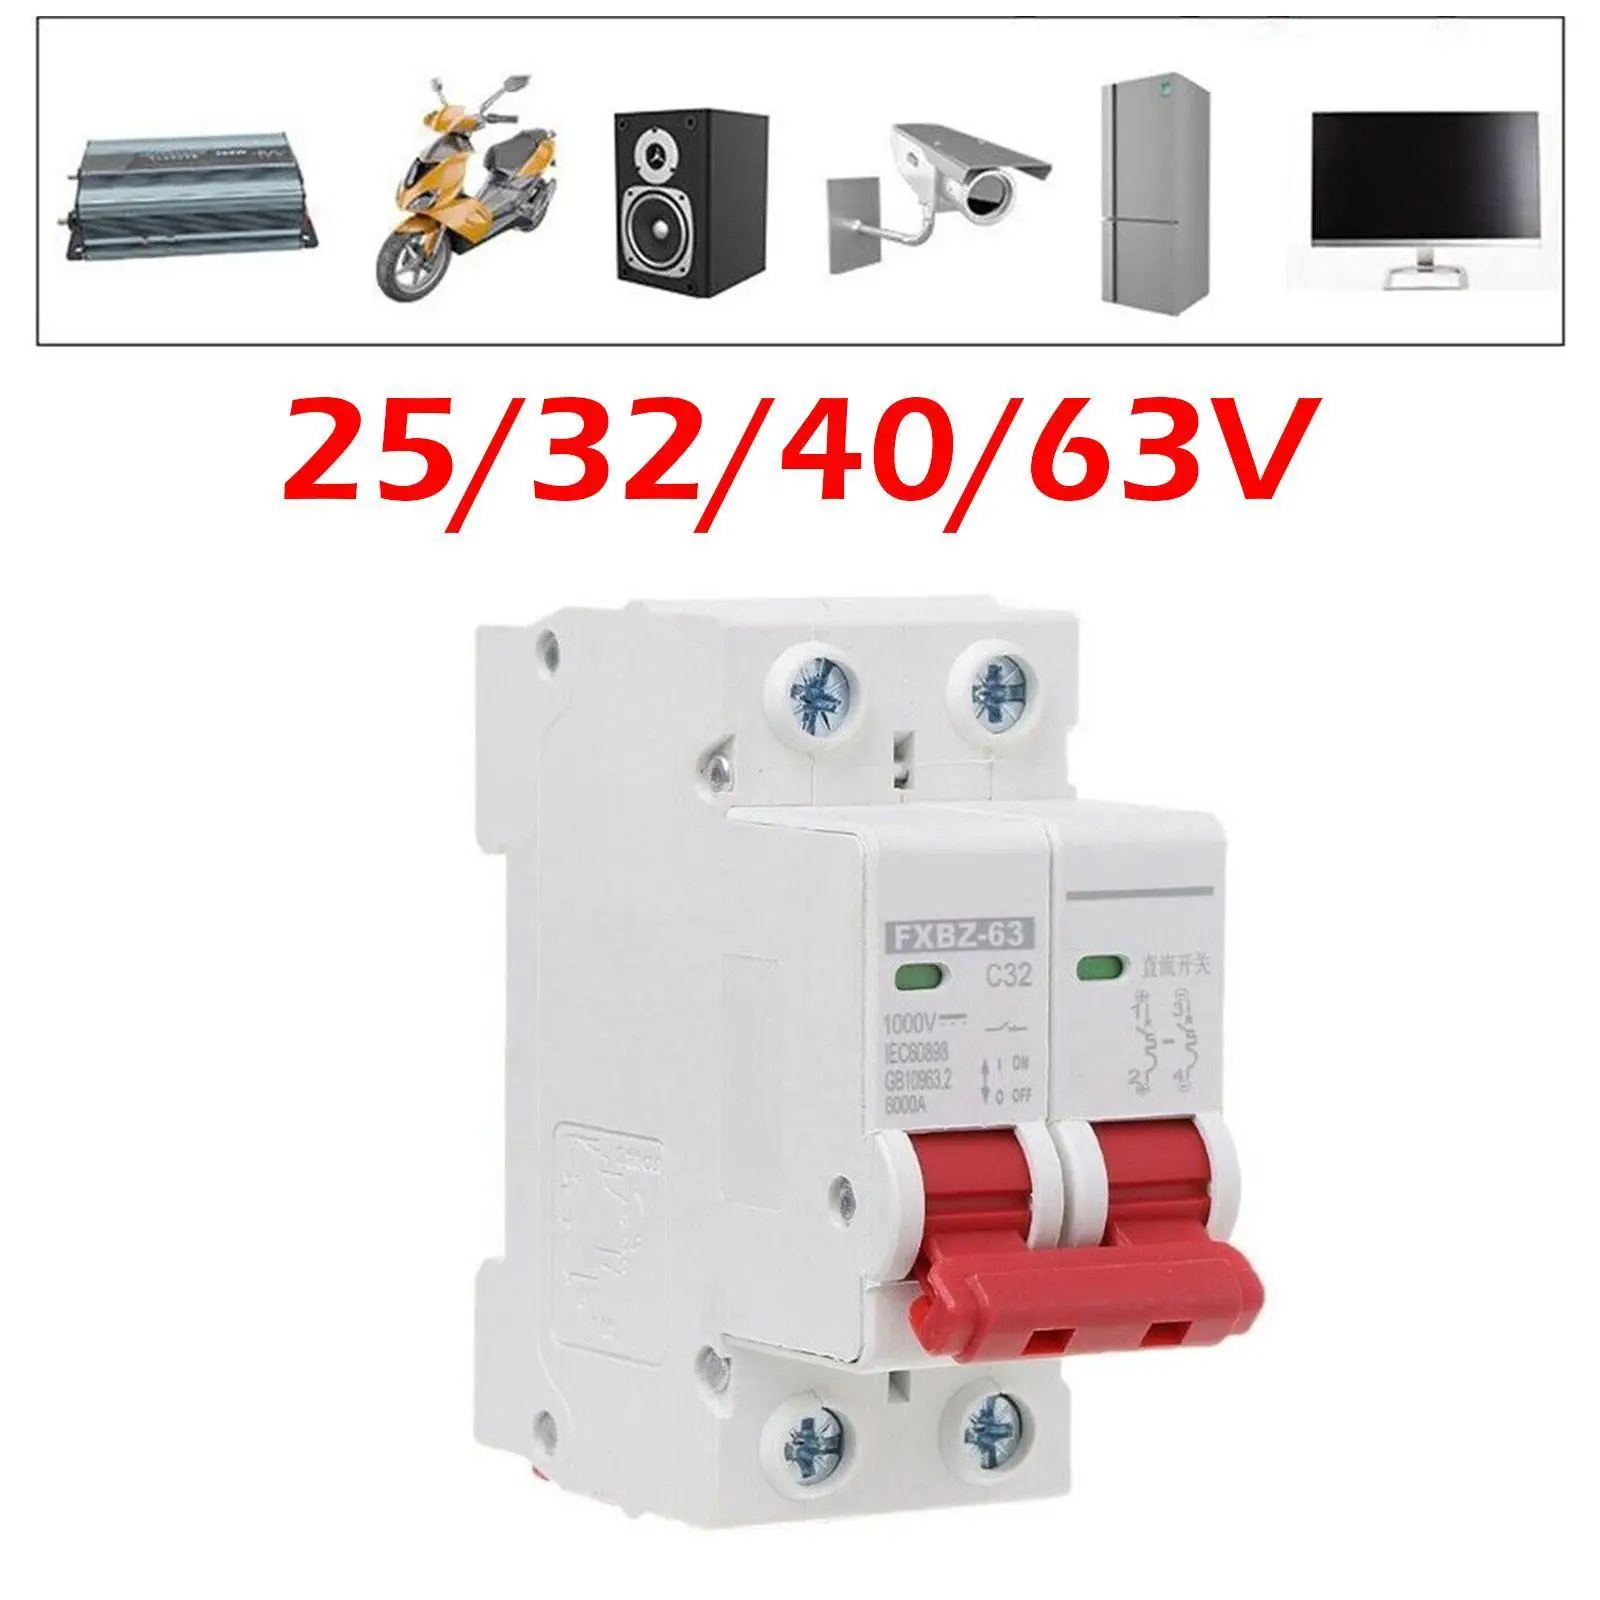 

DC 1000V Solar Mini Circuit Breaker Overload Protection DC1000V PV 2P MCB Switch Photovoltaic 6A/10A/16A/20A/25A/32A/40A/50 Y4J0